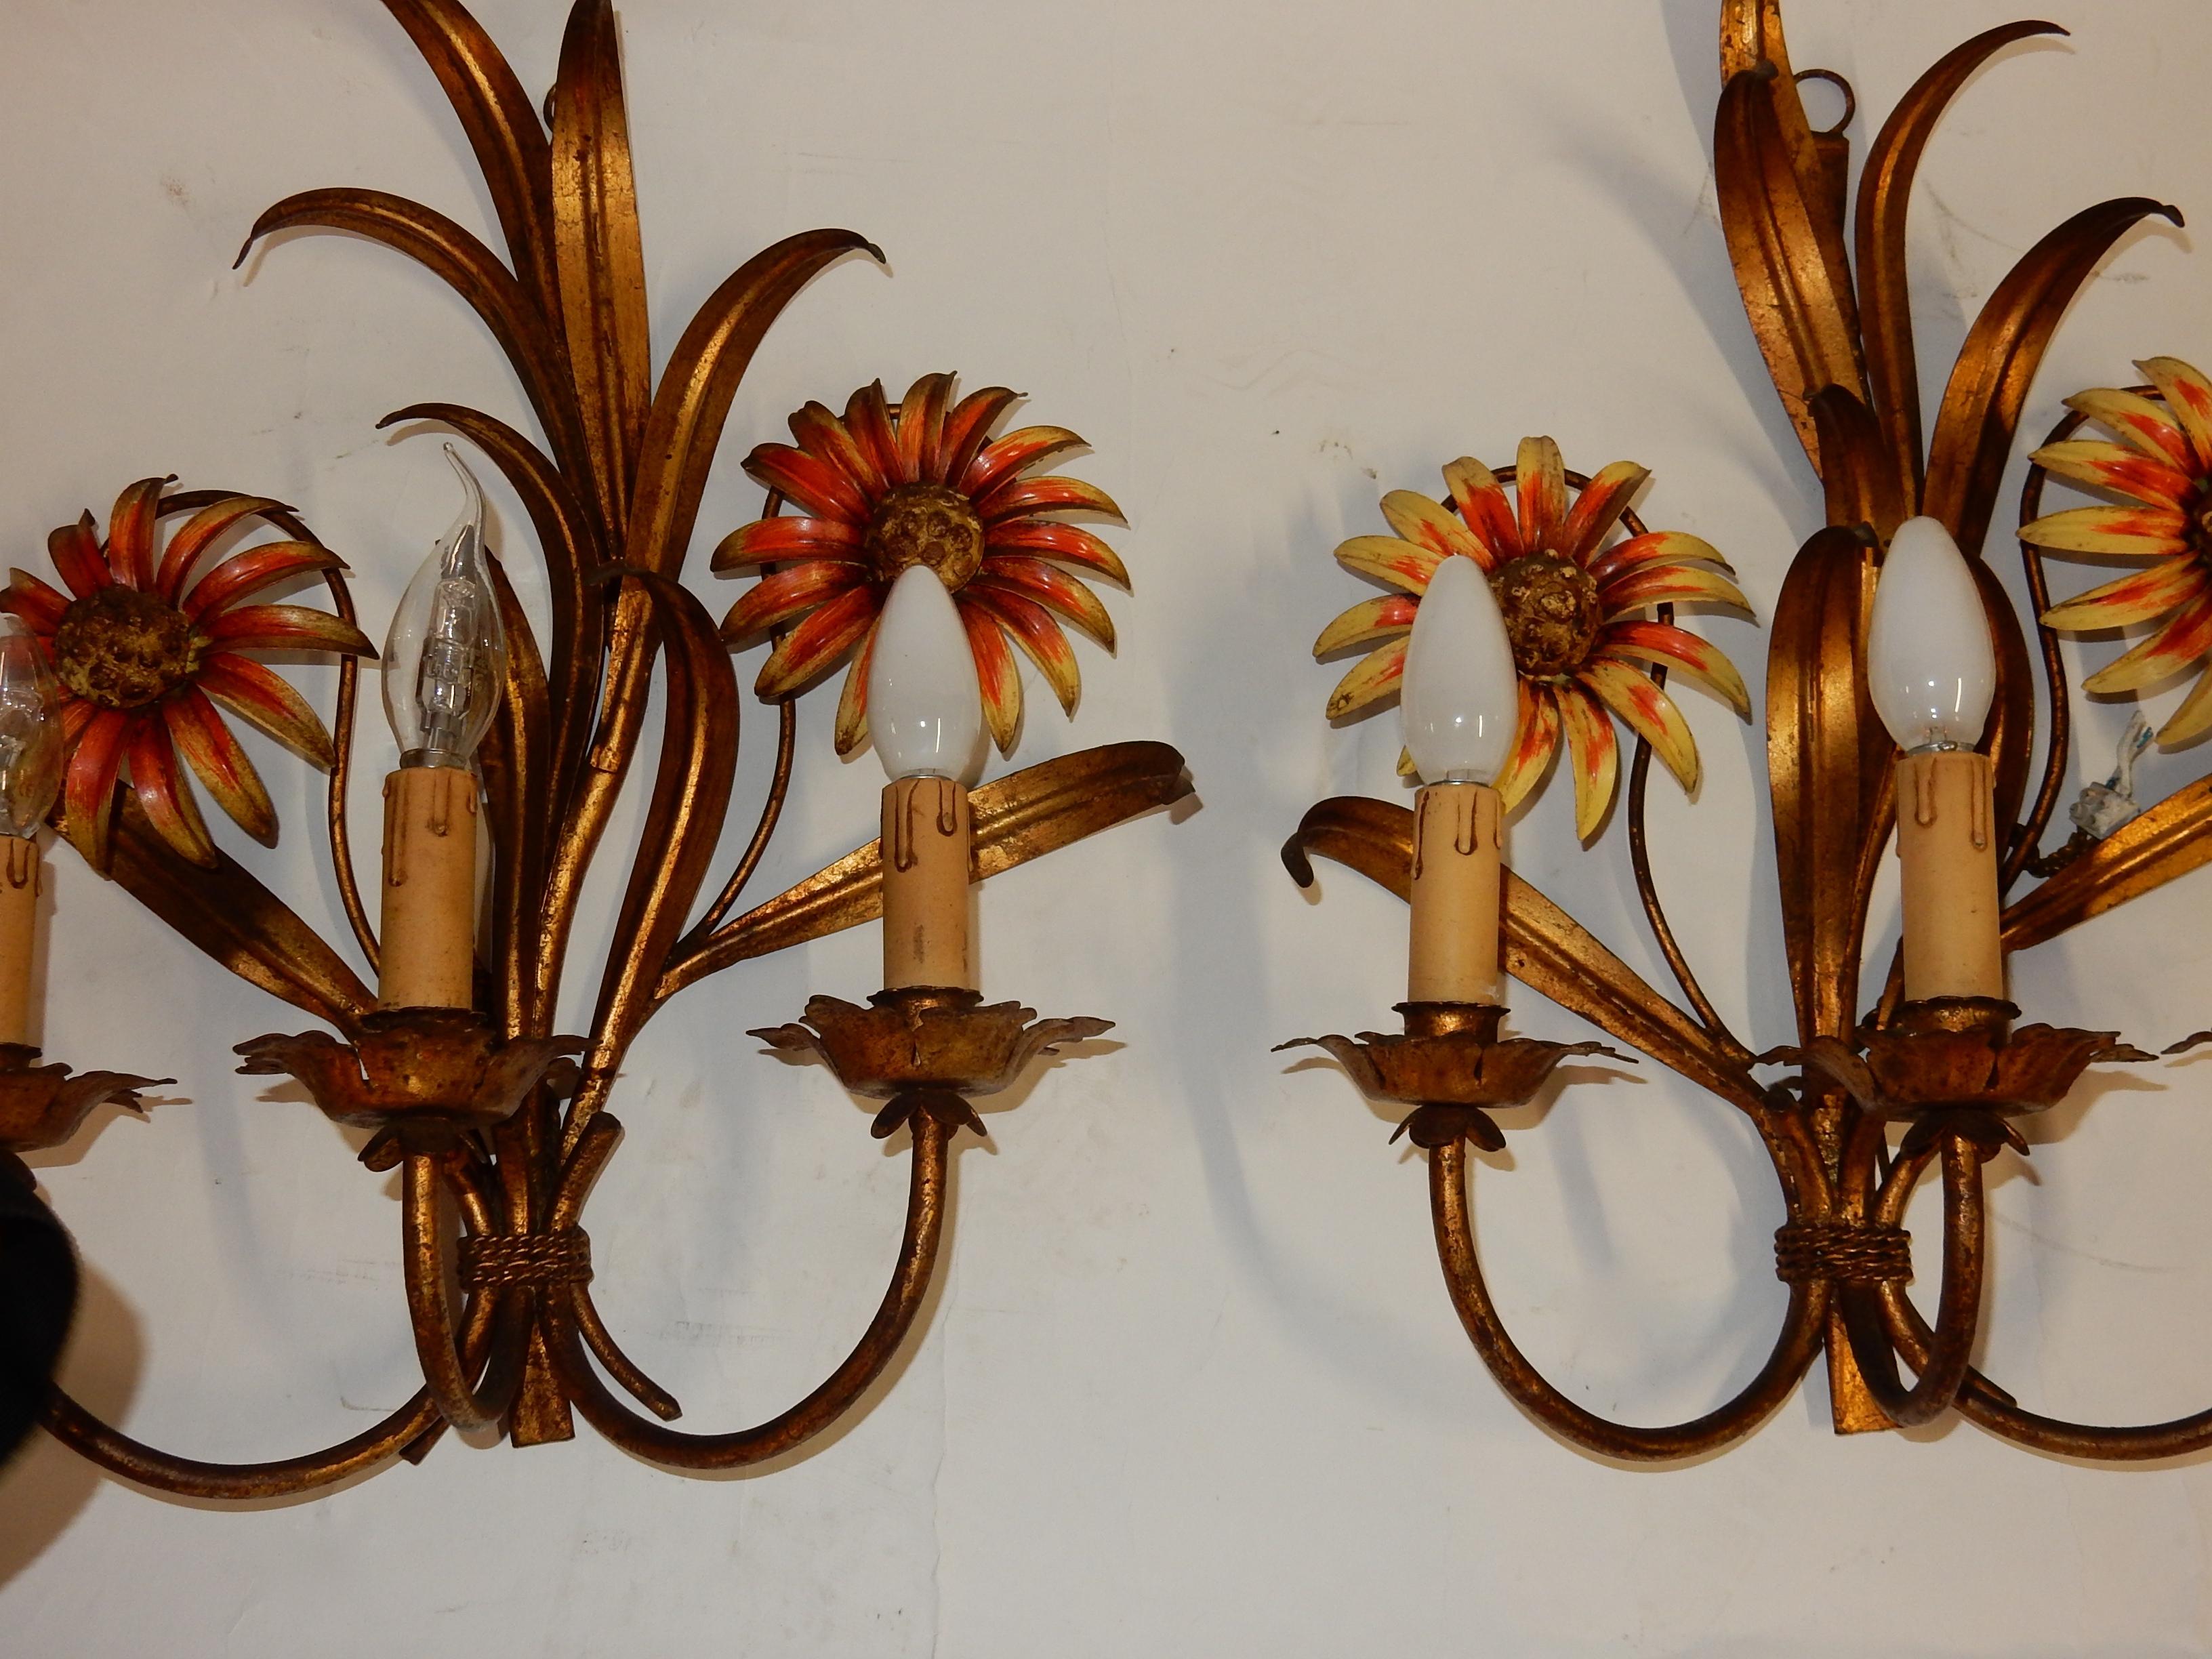 Iron 1970 Pair of Painted Metal Sconces with Sunflower Decor 3 Arms of Light For Sale